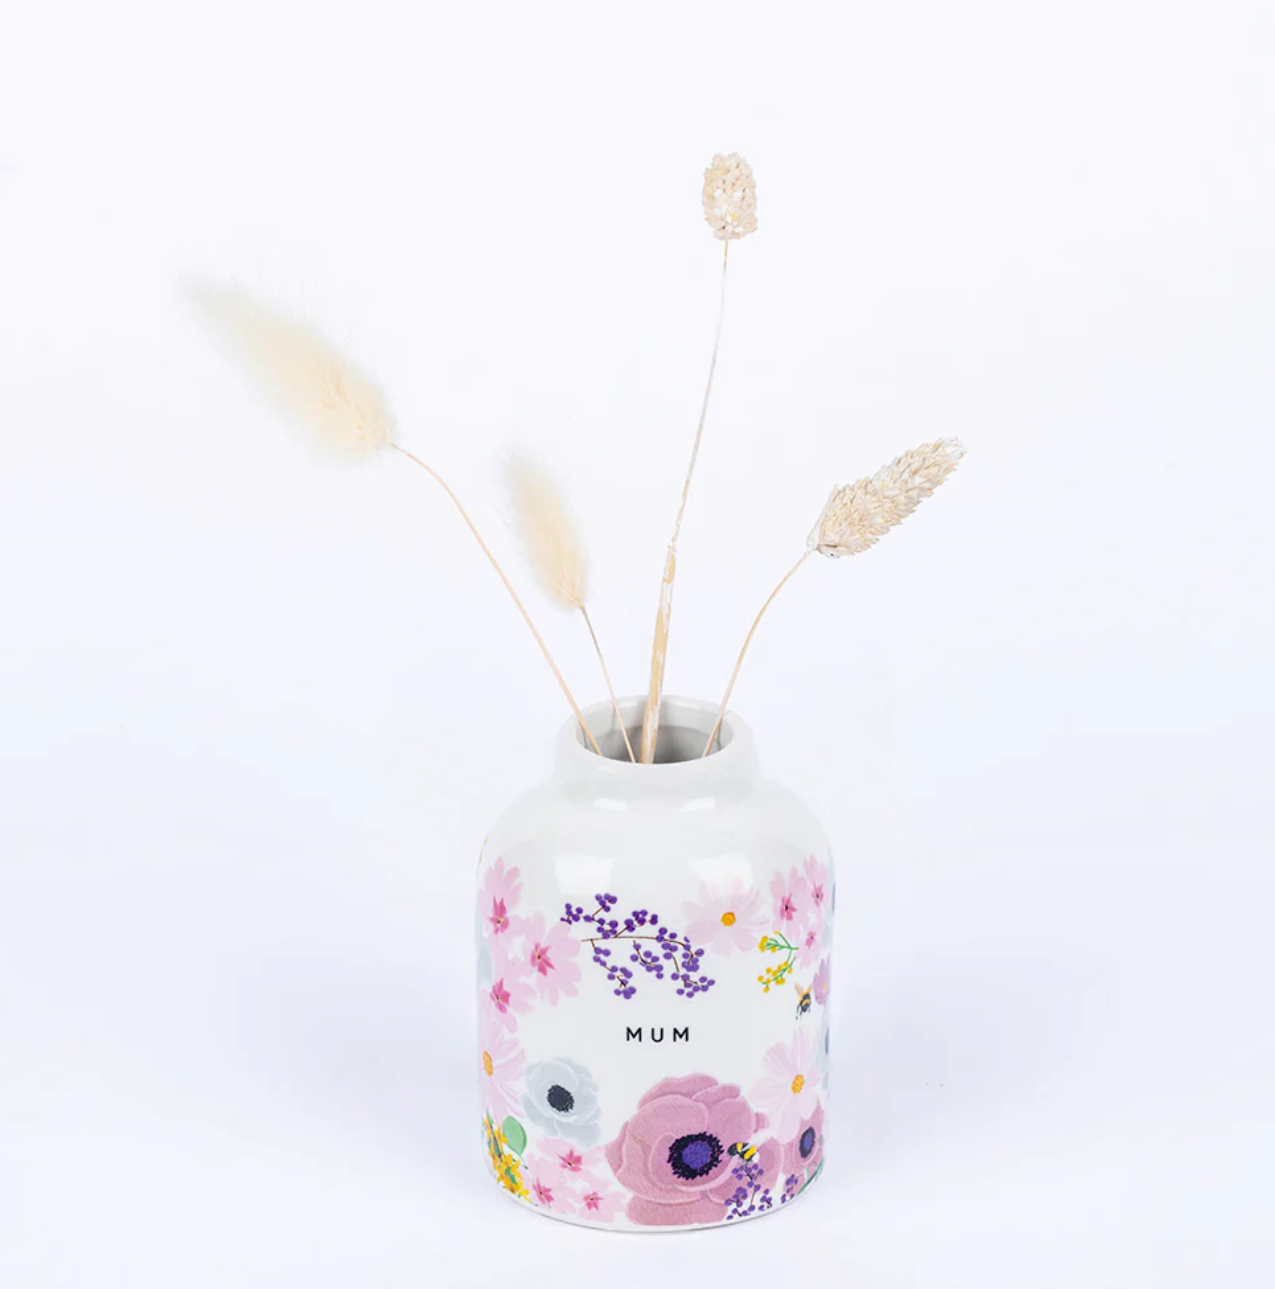 Belly Button Mum Anemone Floral Bud Vase